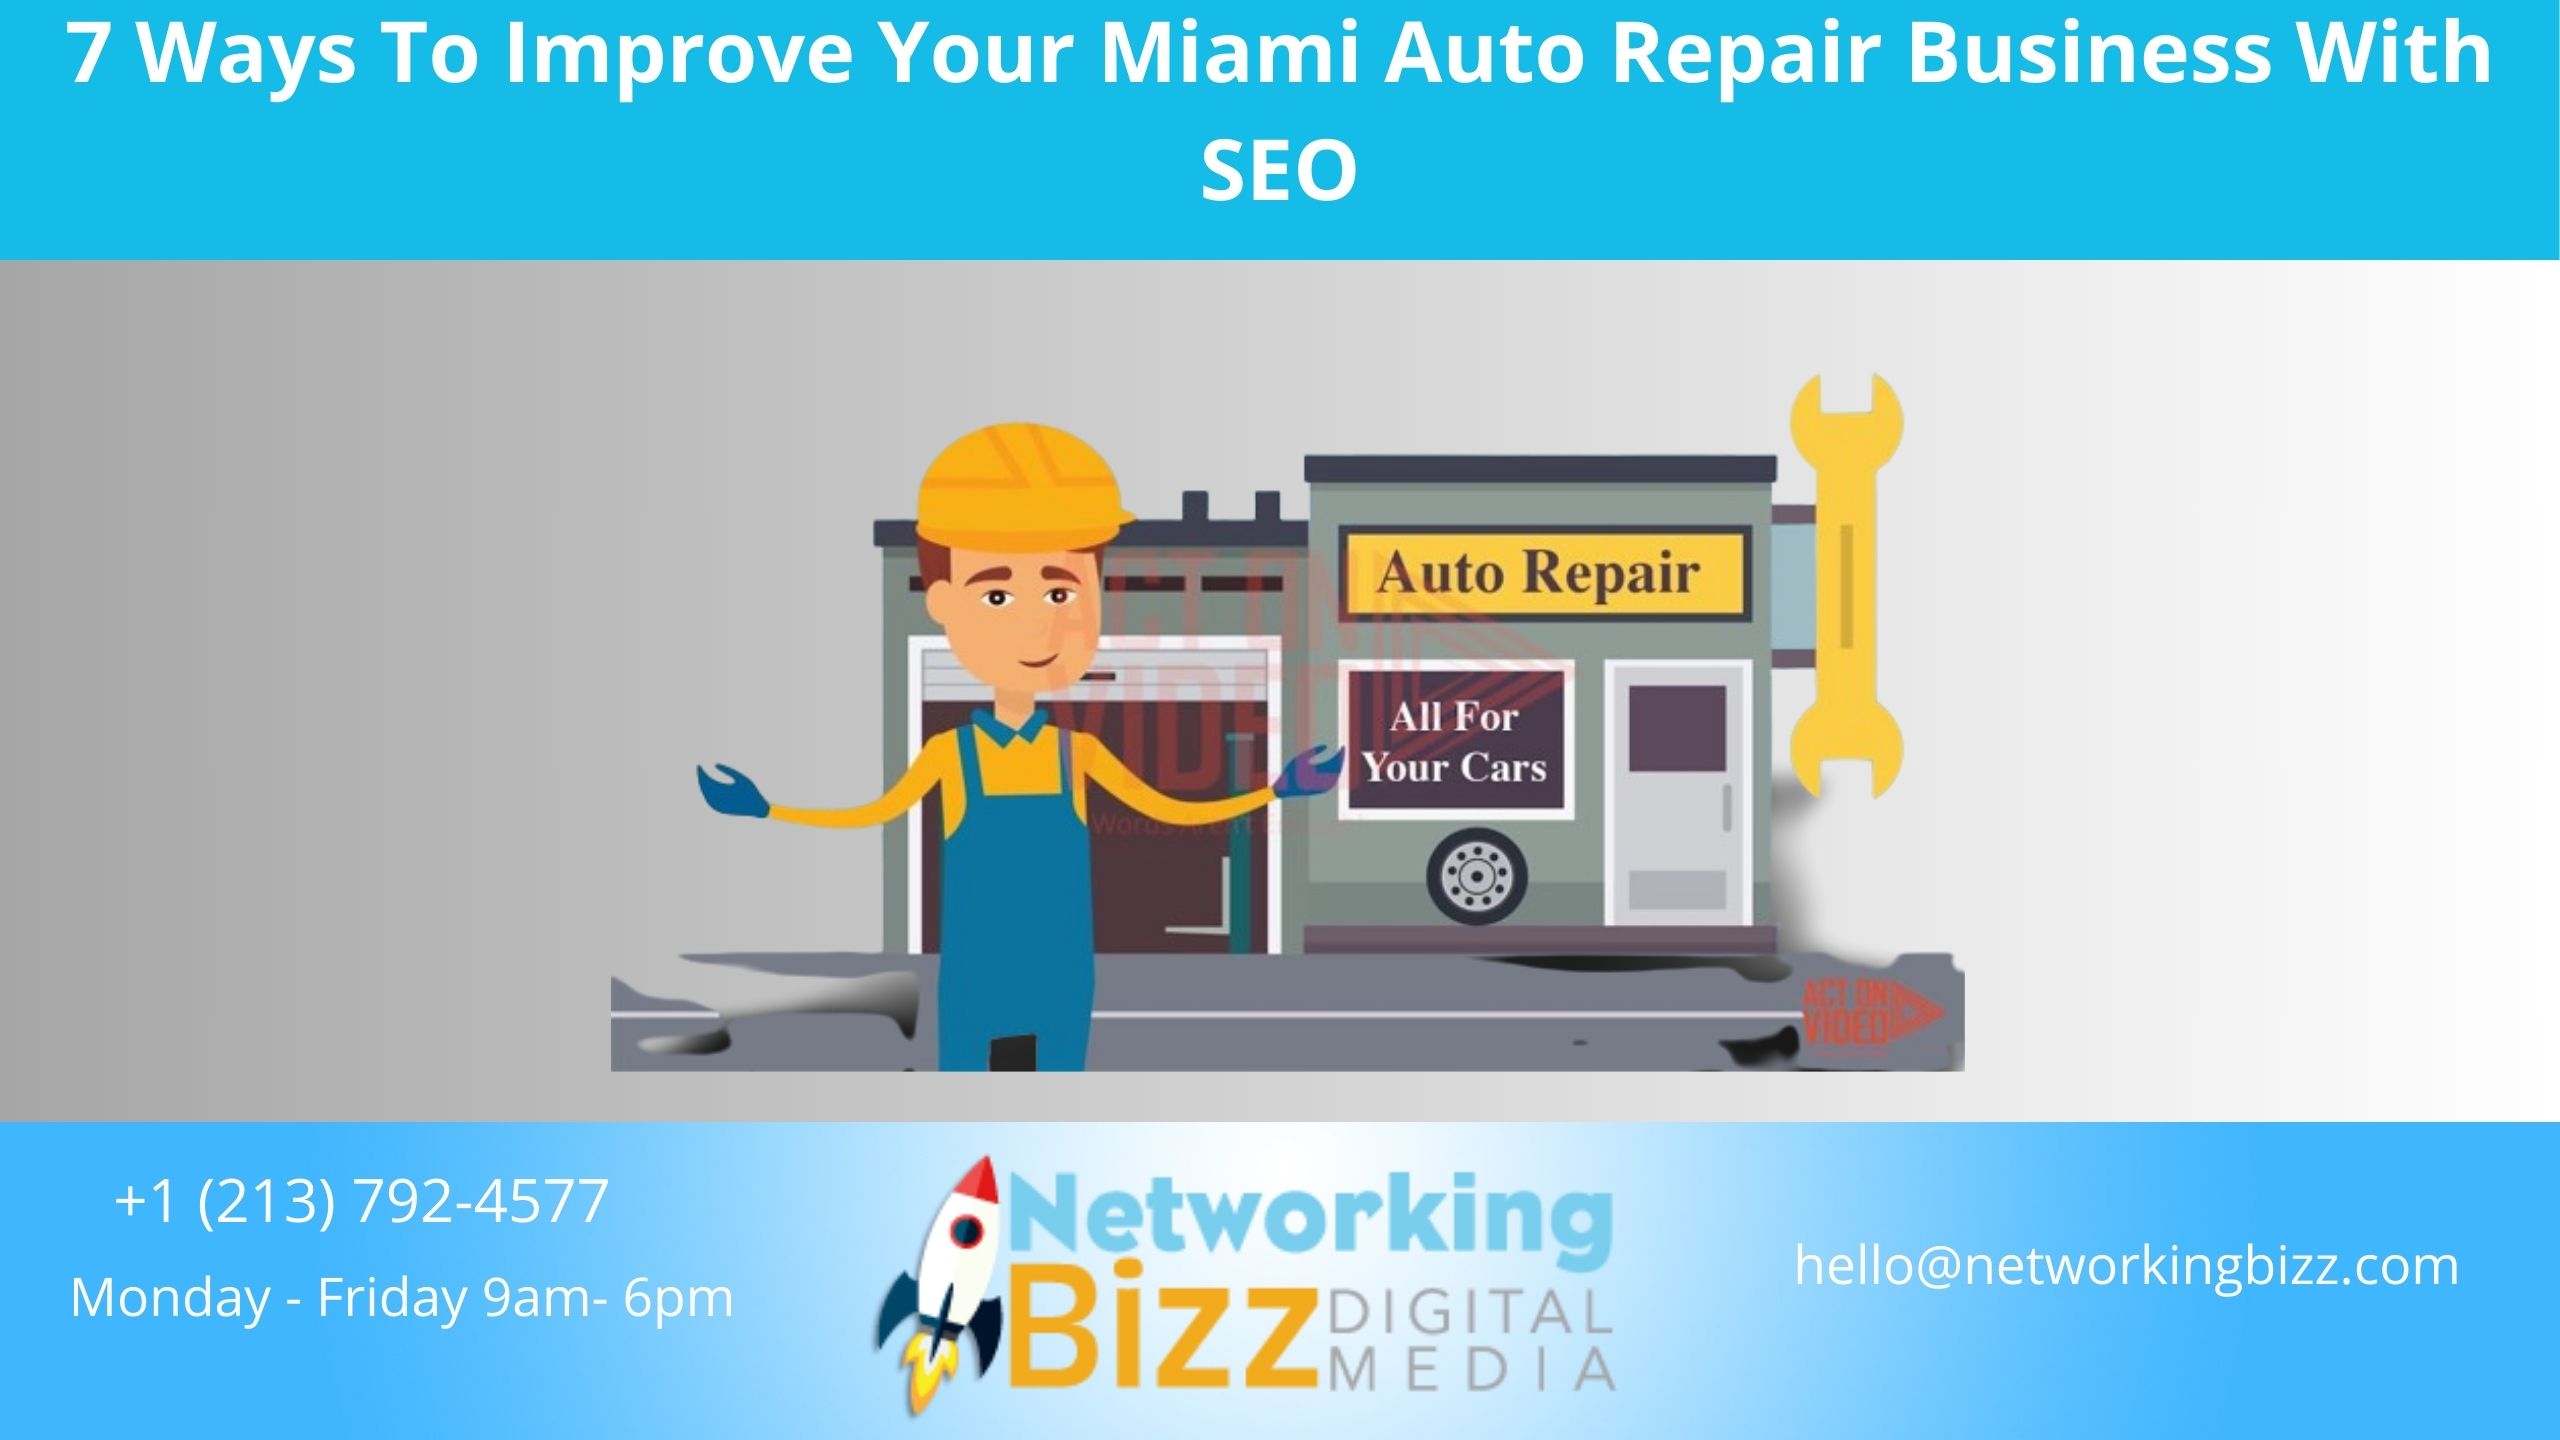 7 Ways To Improve Your Miami Auto Repair Business With SEO